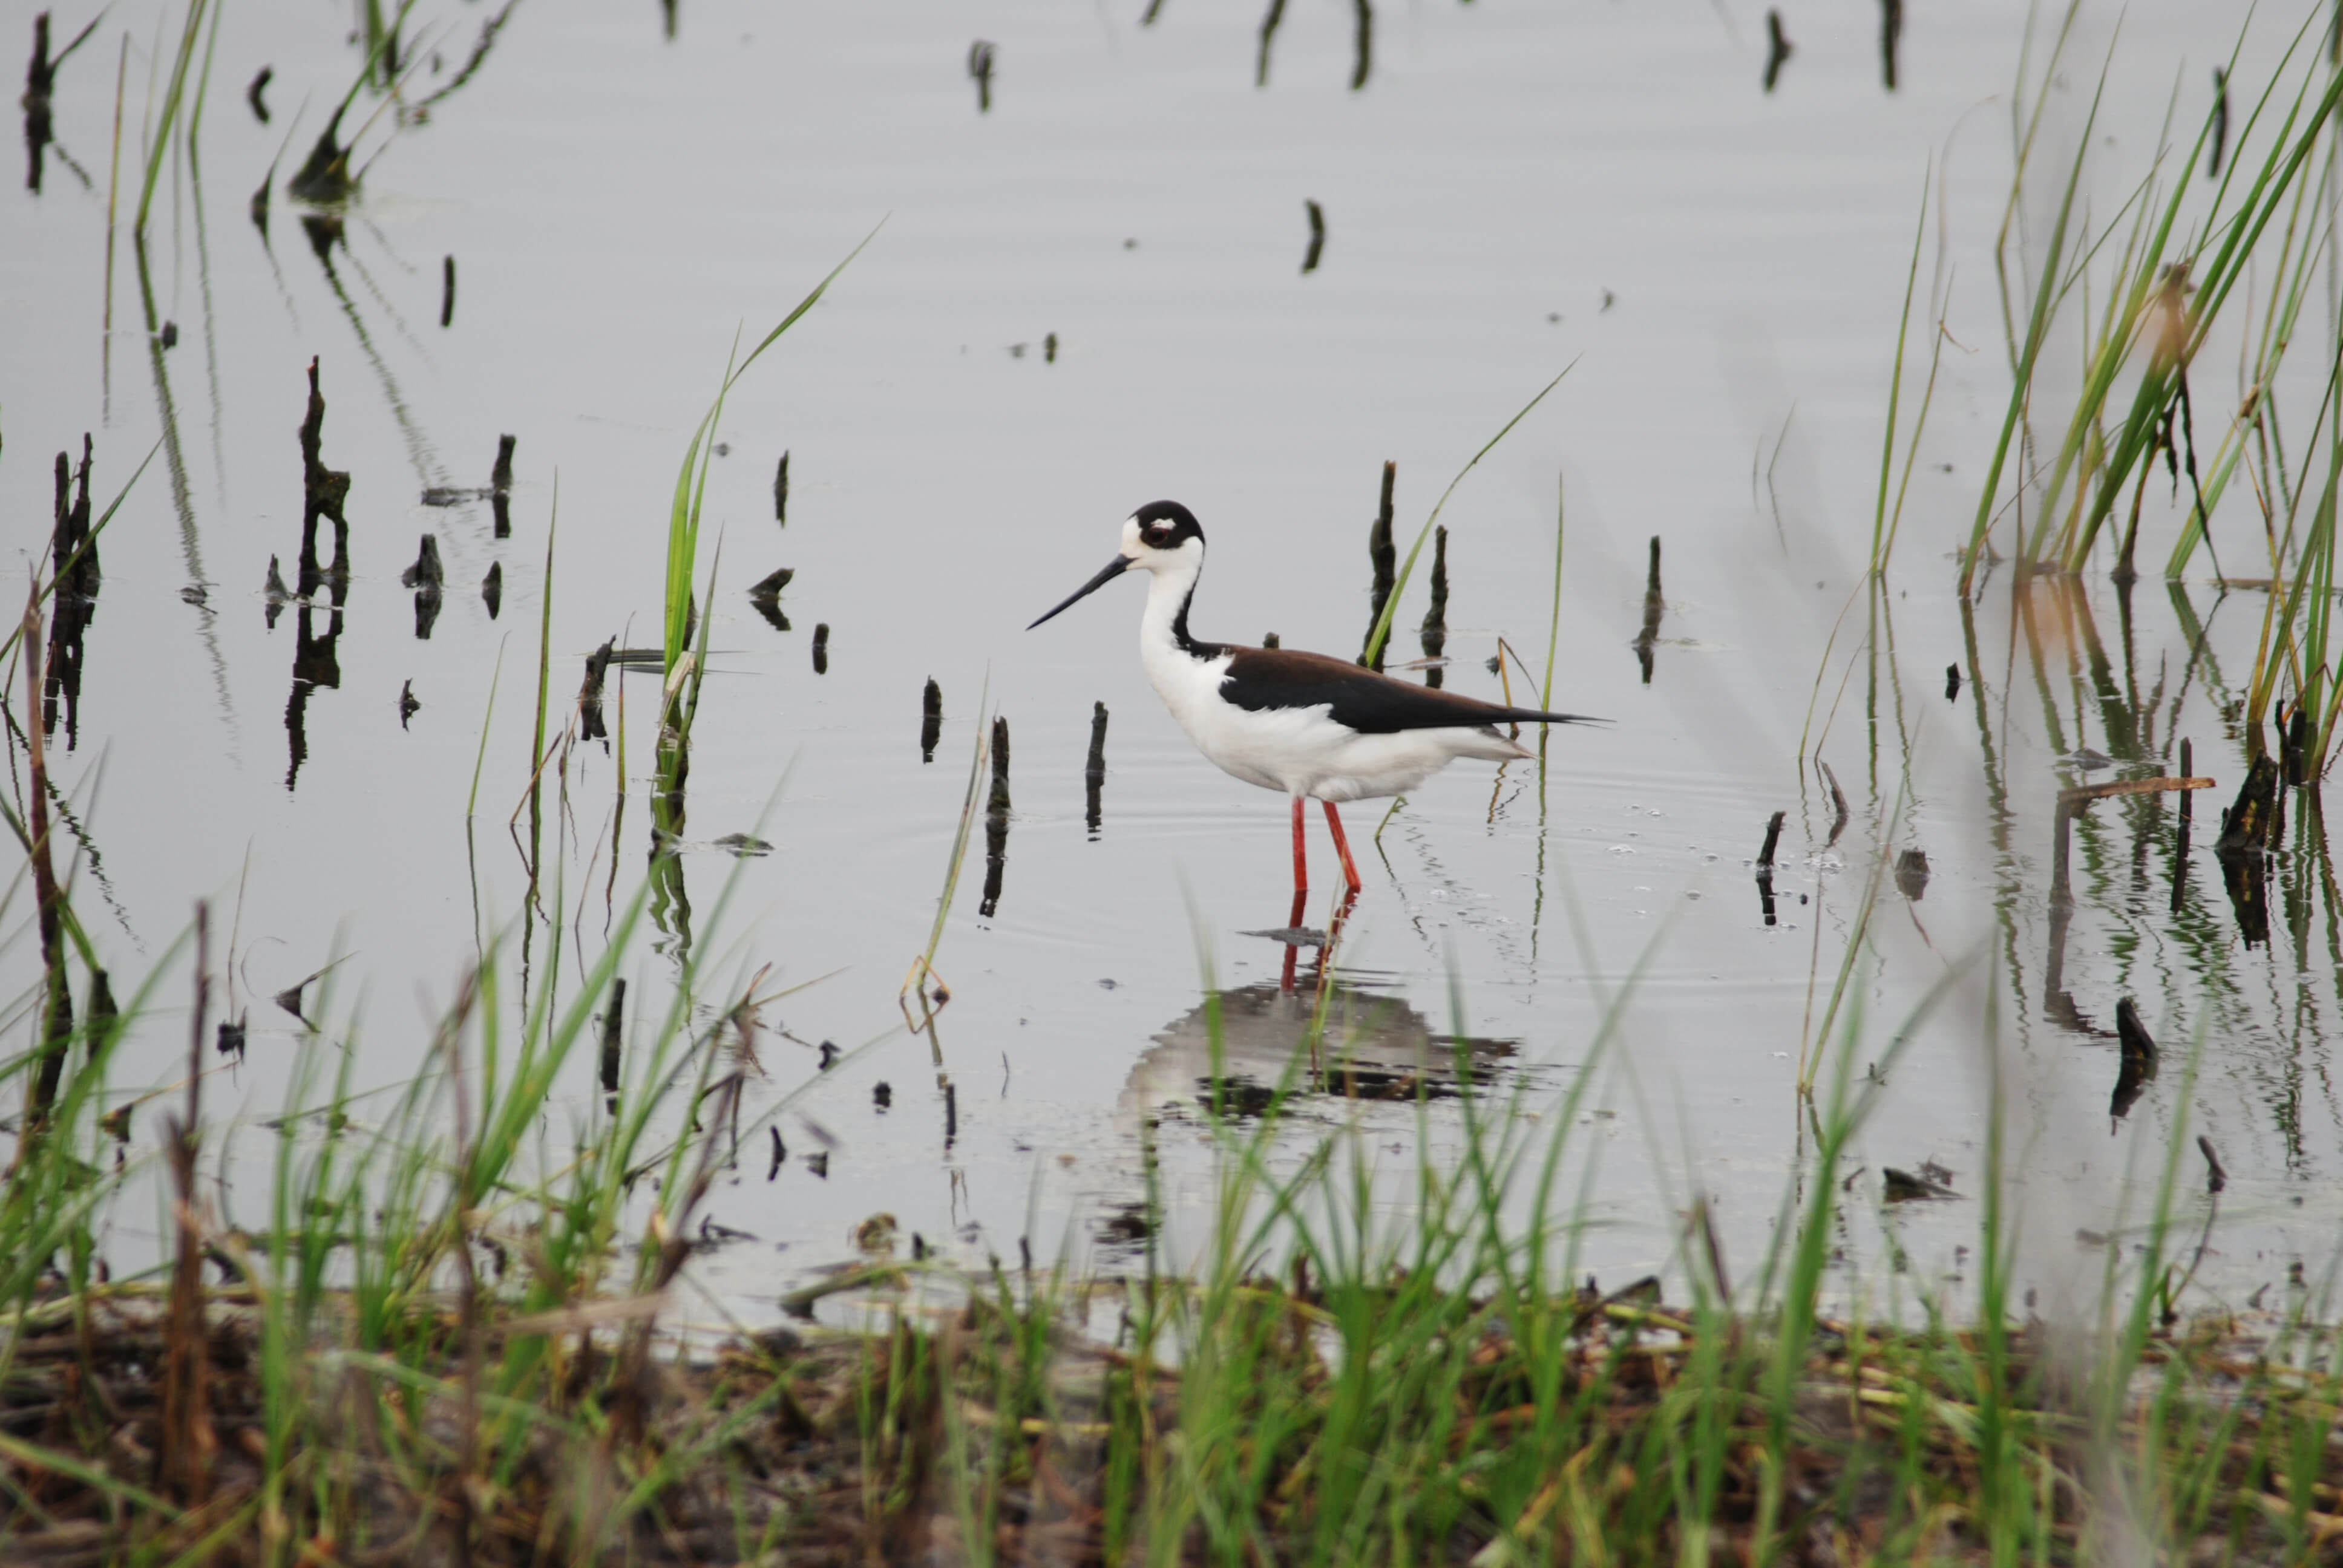 I spotted a Black-necked Stilt in the wetlands at Duck Creek State Conservation Area in Missouri. Photo by Dan Lebbin